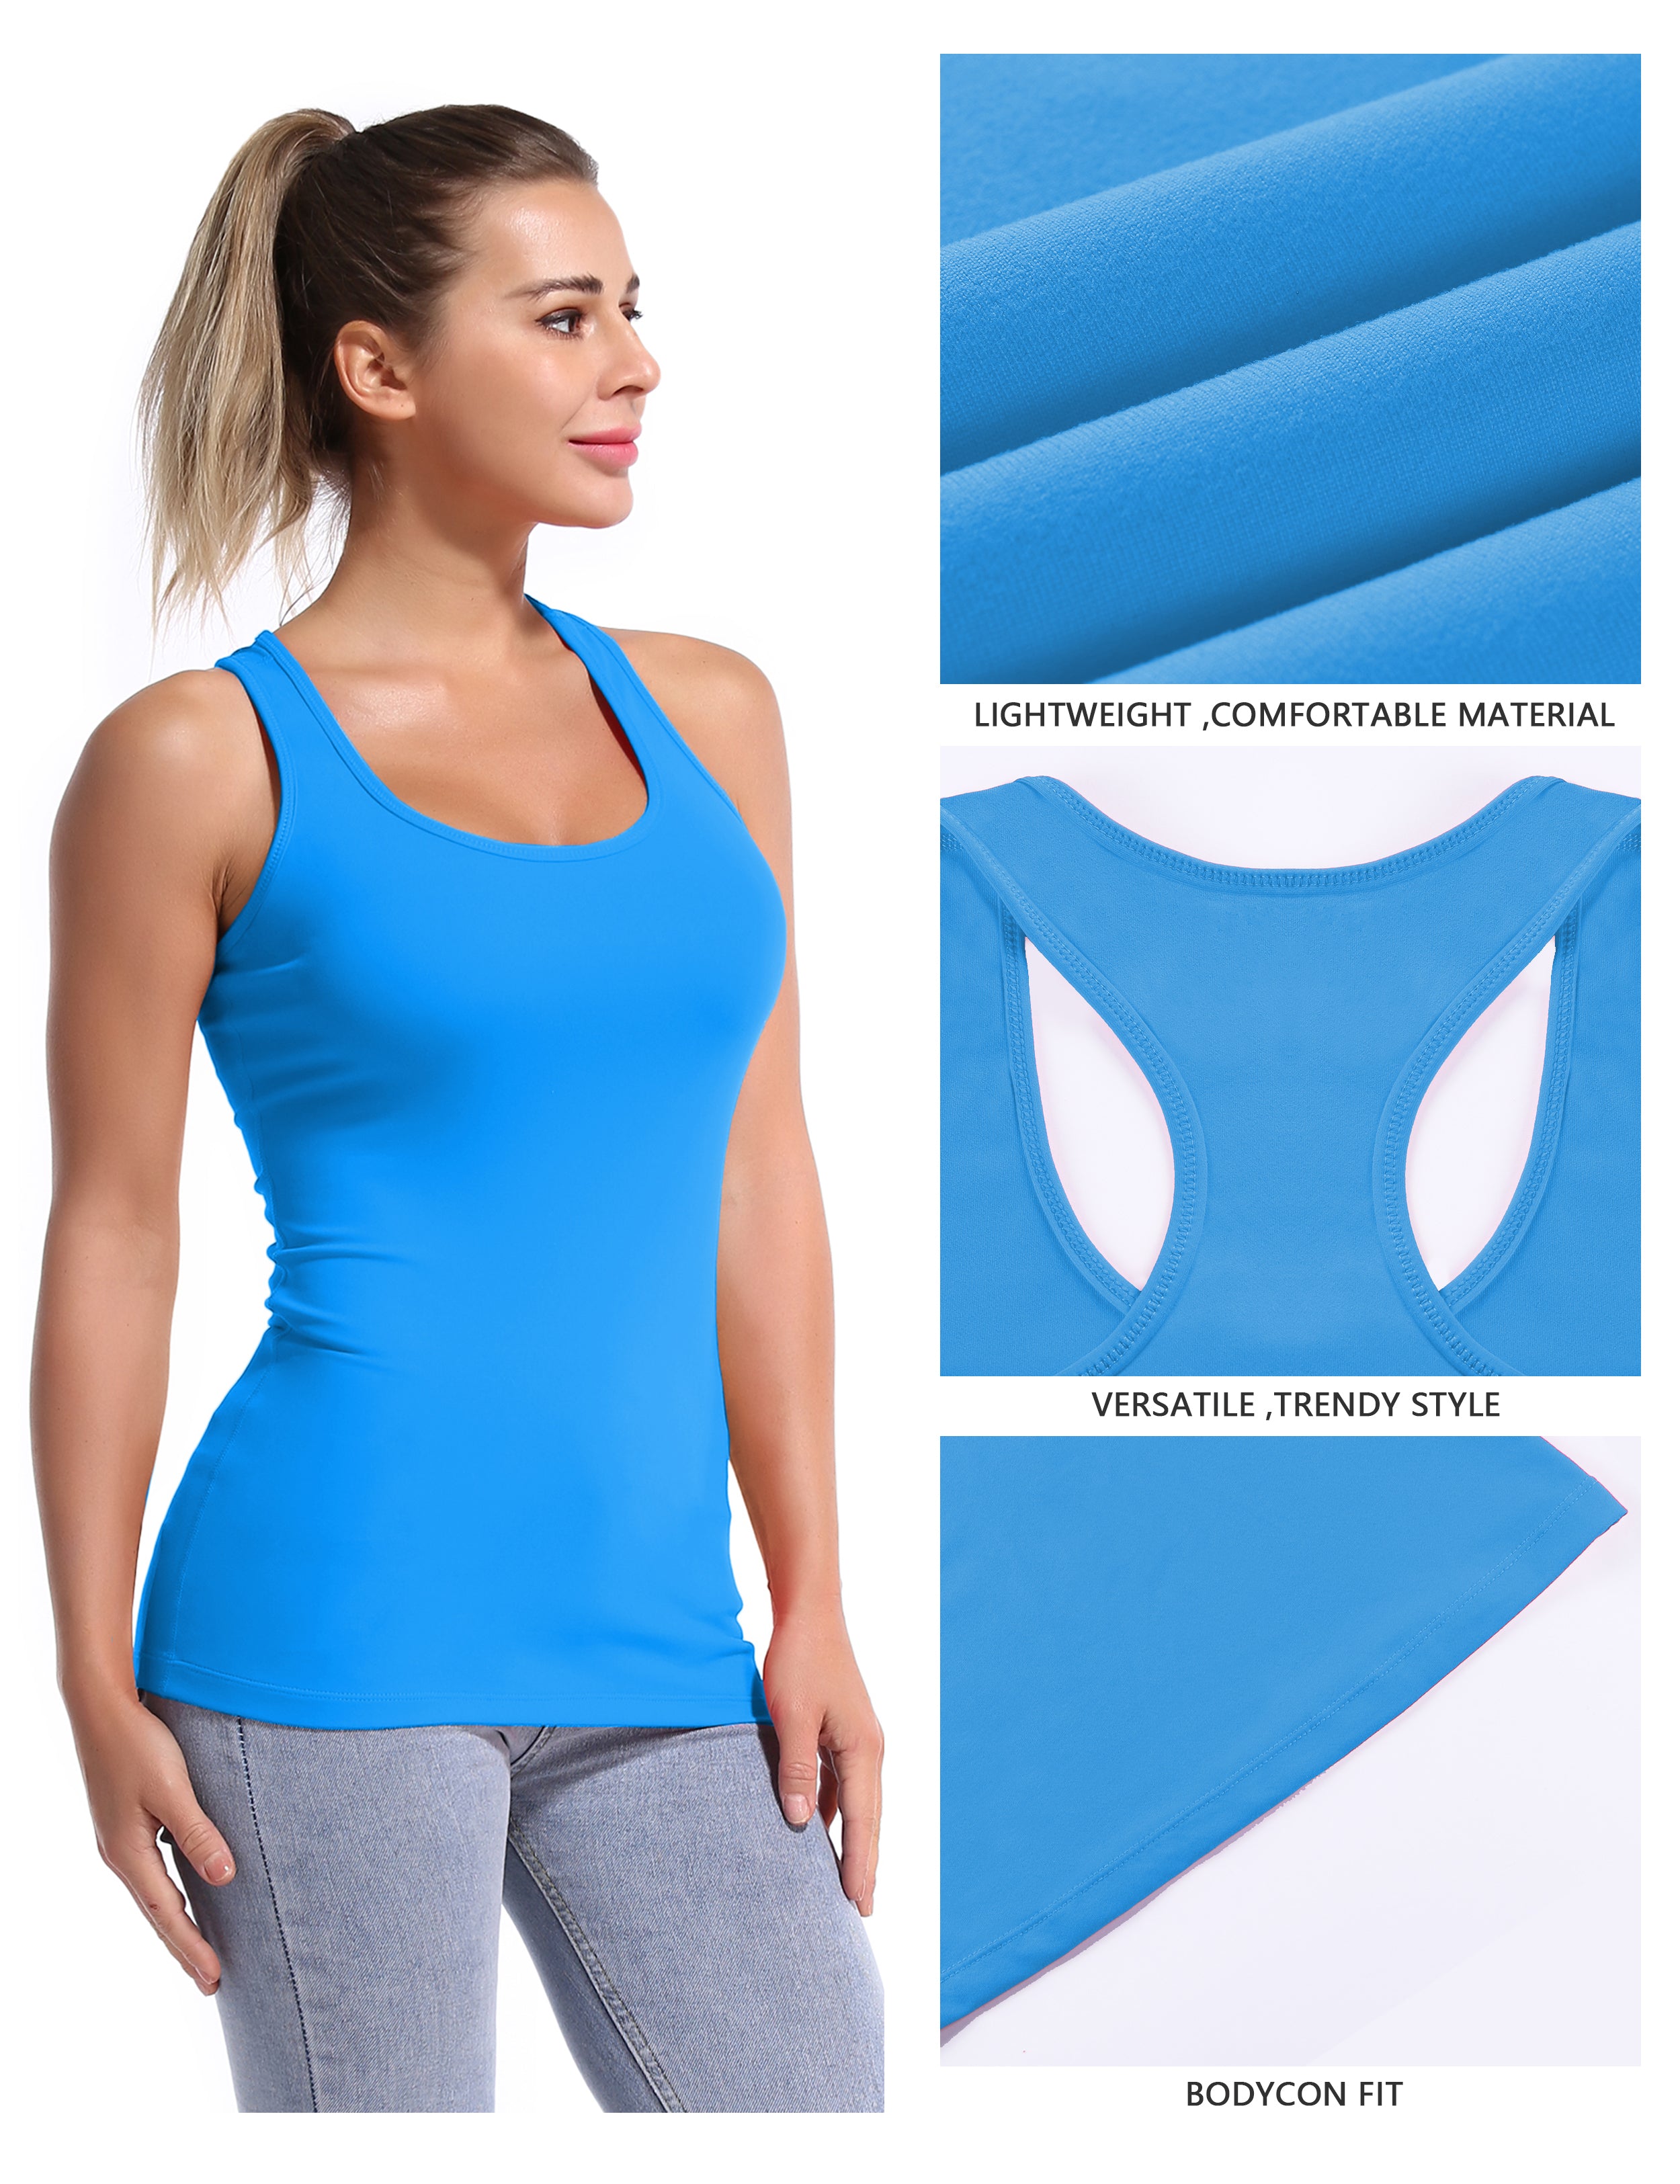 Racerback Athletic Tank Tops electricblue 92%Nylon/8%Spandex(Cotton Soft) Designed for Jogging Tight Fit So buttery soft, it feels weightless Sweat-wicking Four-way stretch Breathable Contours your body Sits below the waistband for moderate, everyday coverage